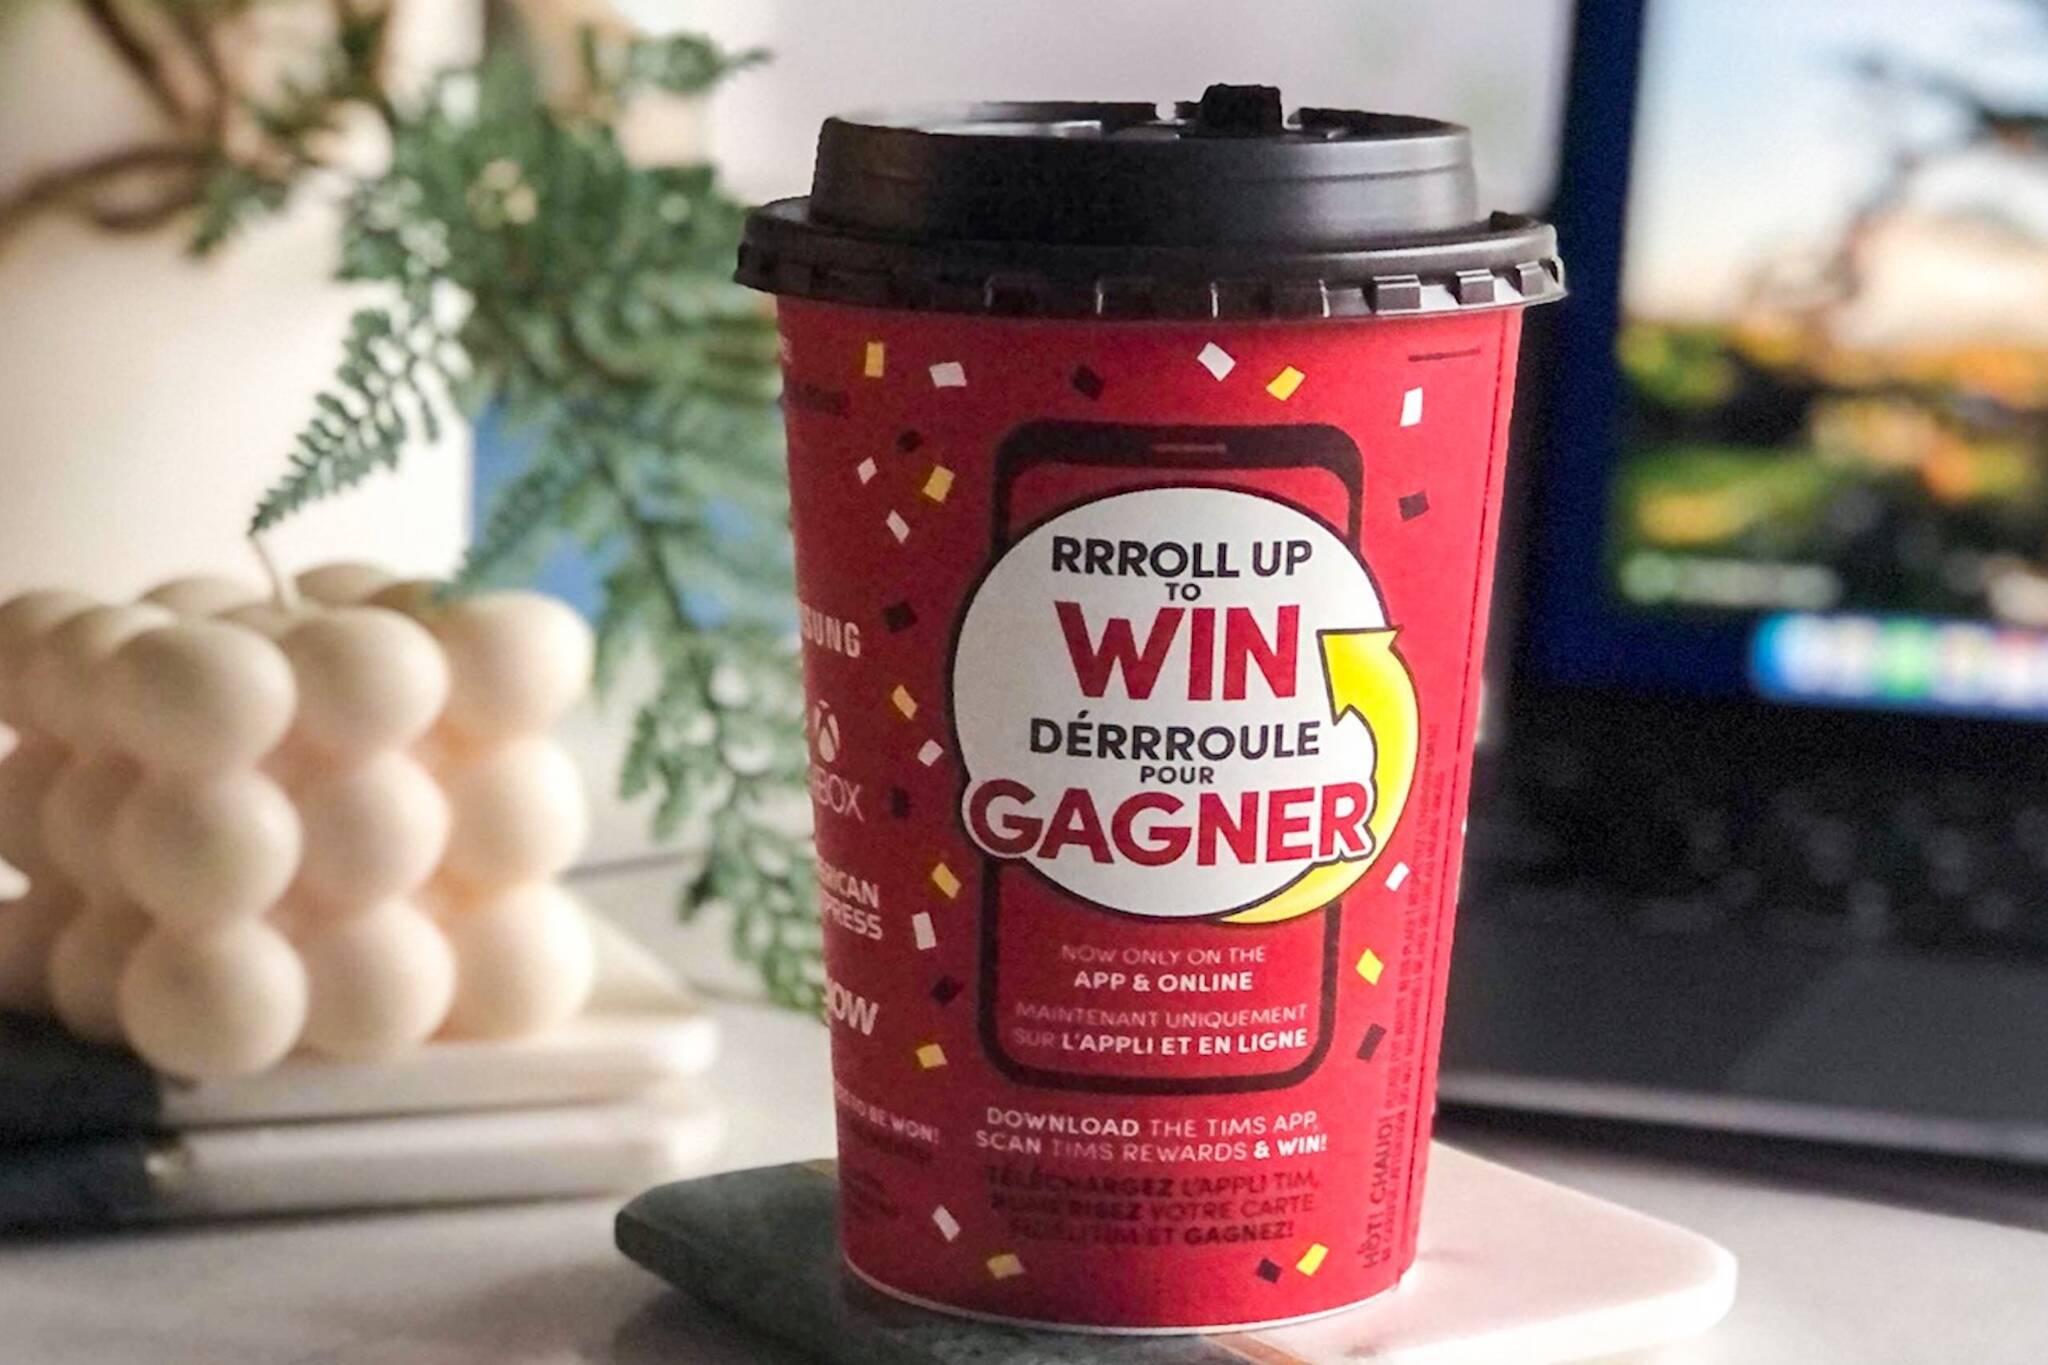 Ledningsevne Venture kyst People are still confused about Tim Horton's Roll up the Rim cups